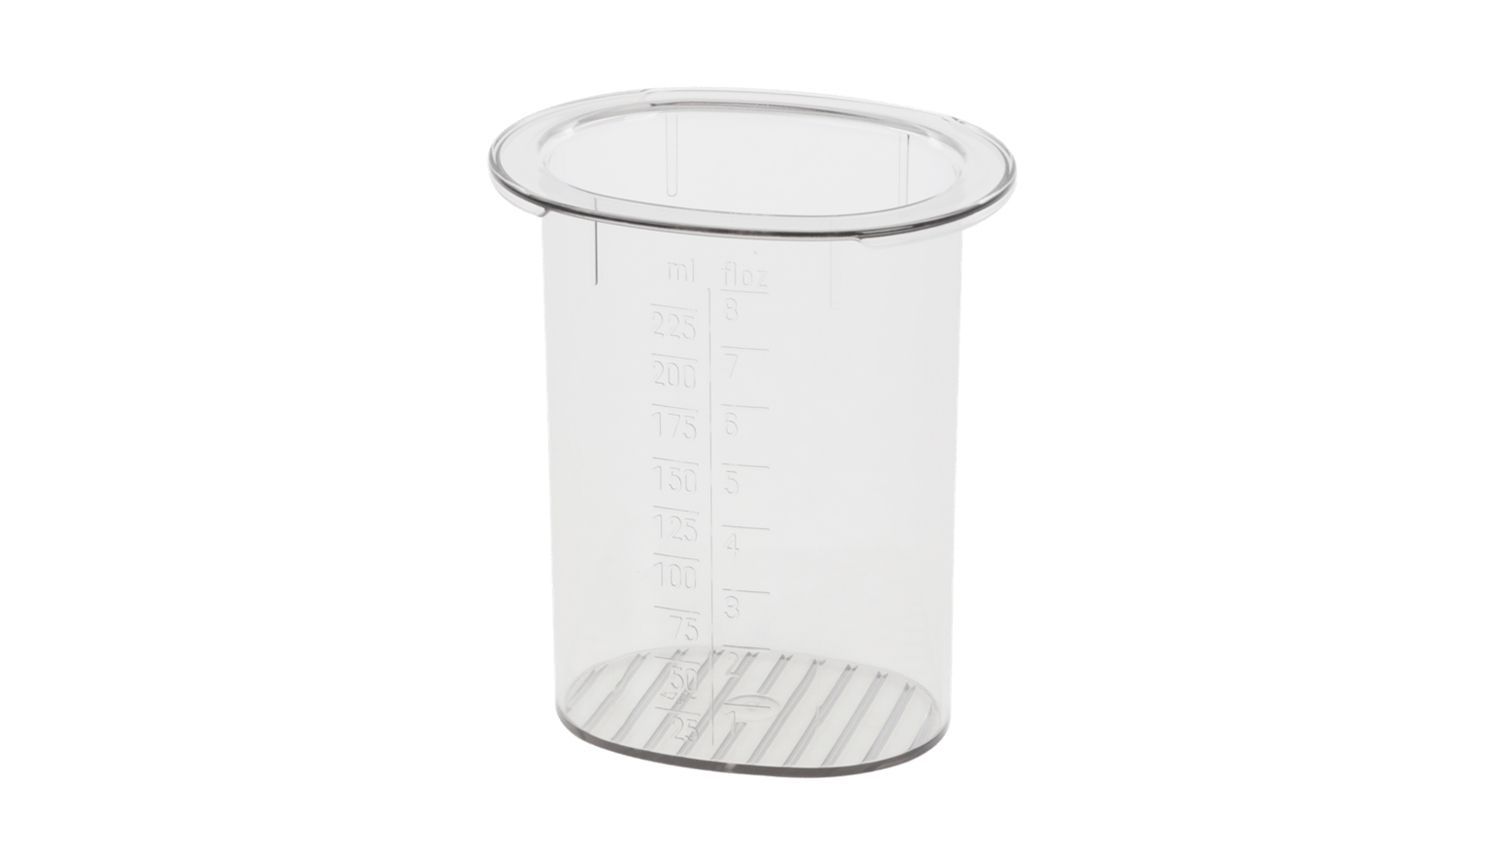 Food Pusher, including Measuring Cup for Bosch Siemens Food Processors - 00635479 BSH - Bosch / Siemens